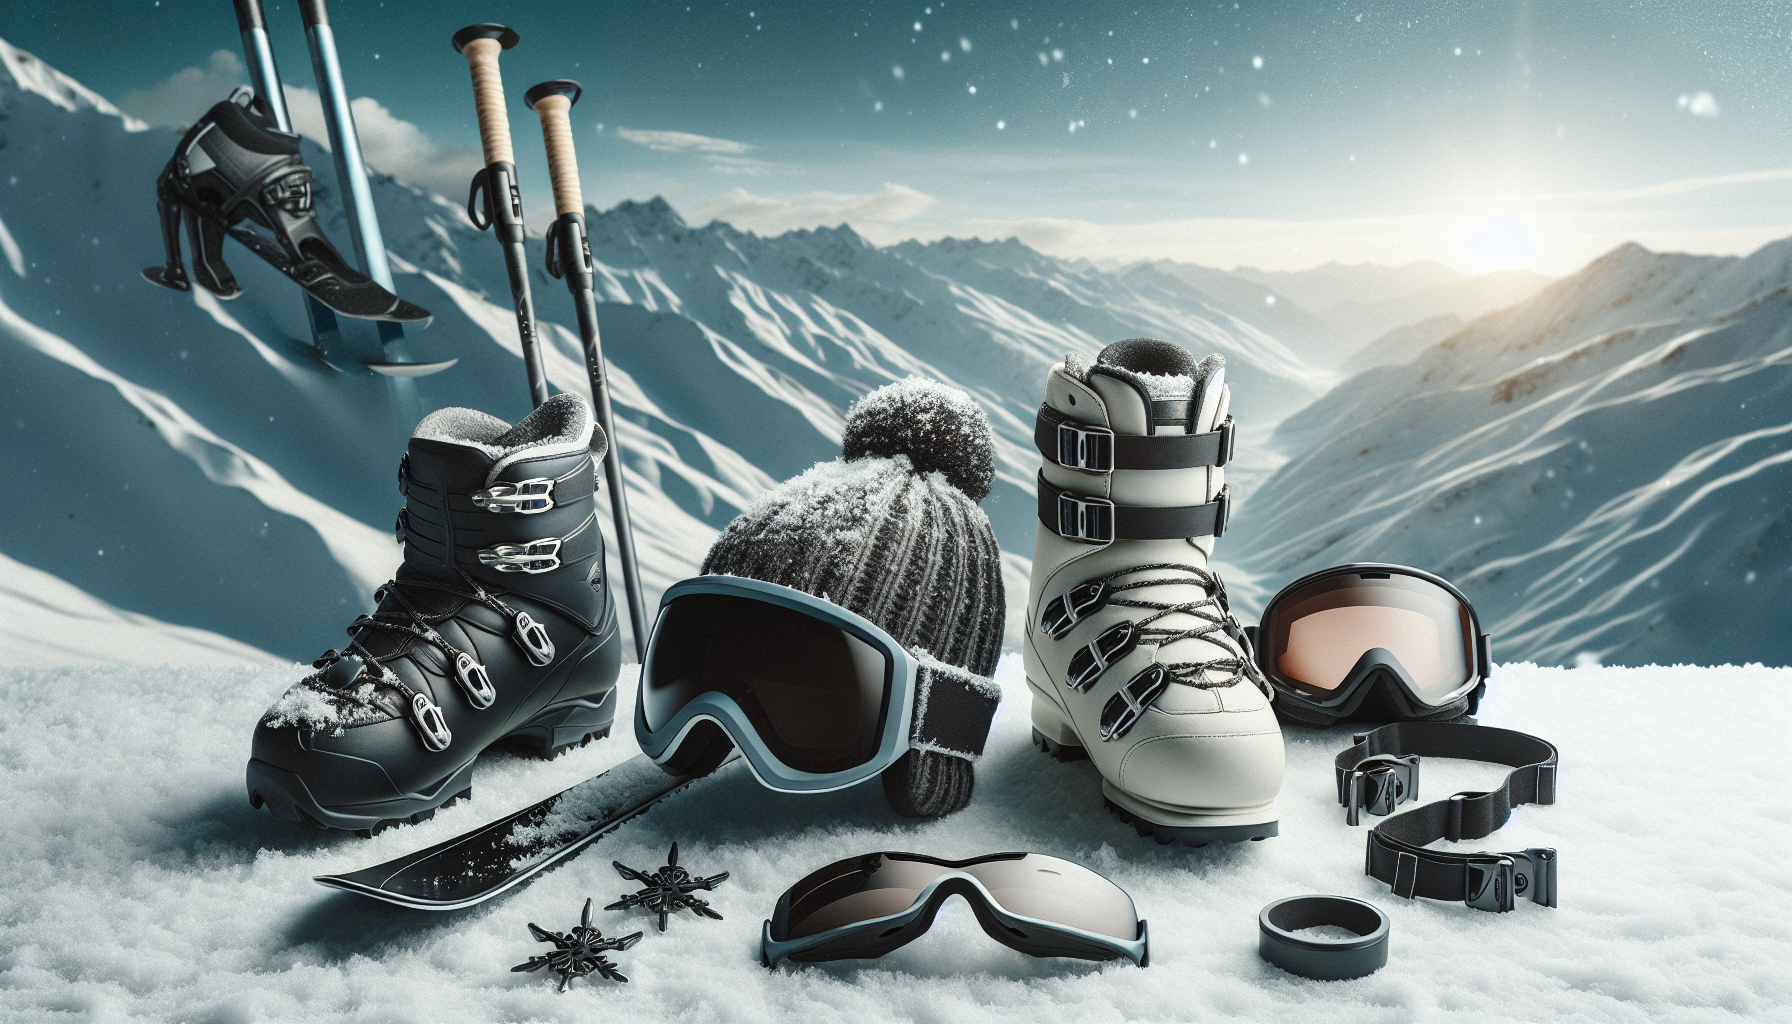 Essential Ski Accessories for a Safe and Enjoyable Trip